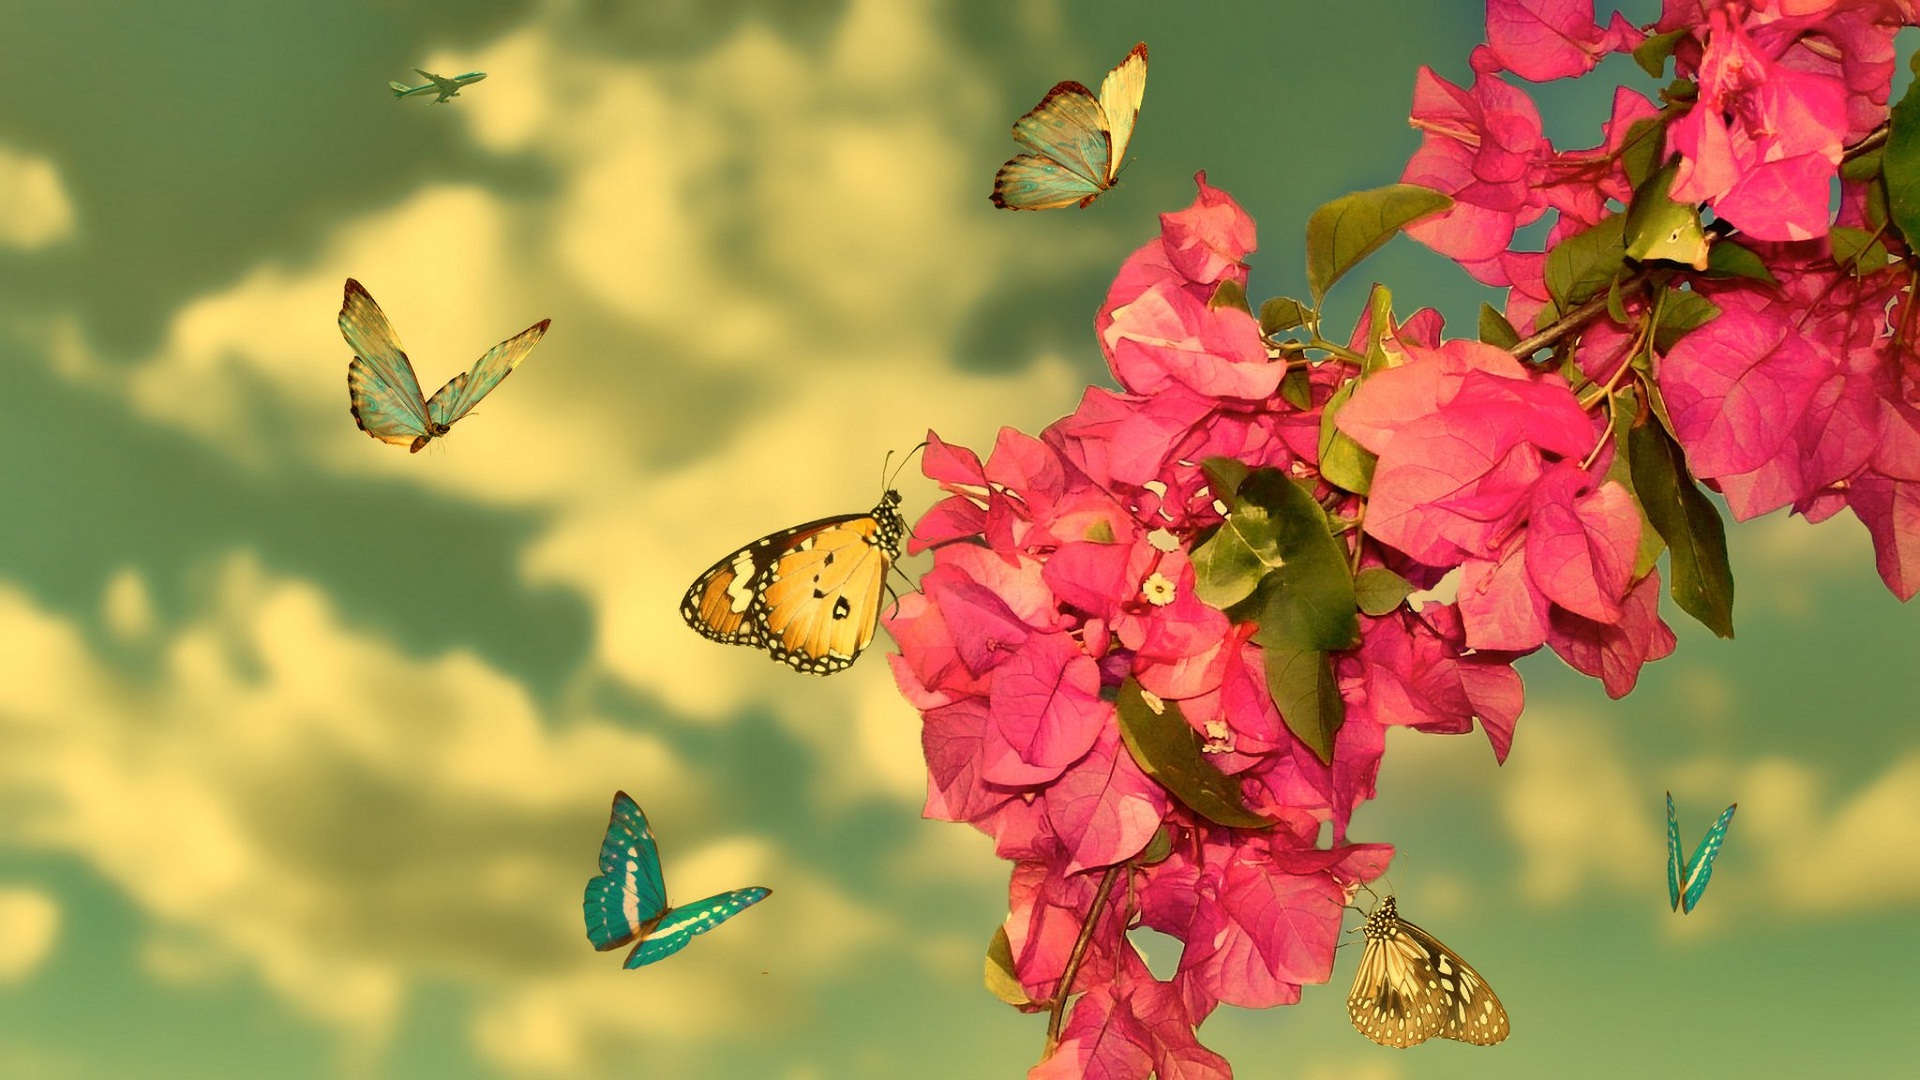 Earth Butterfly Blossom Spring Pink Flower Bougainvillea Manipulation 1920x1080